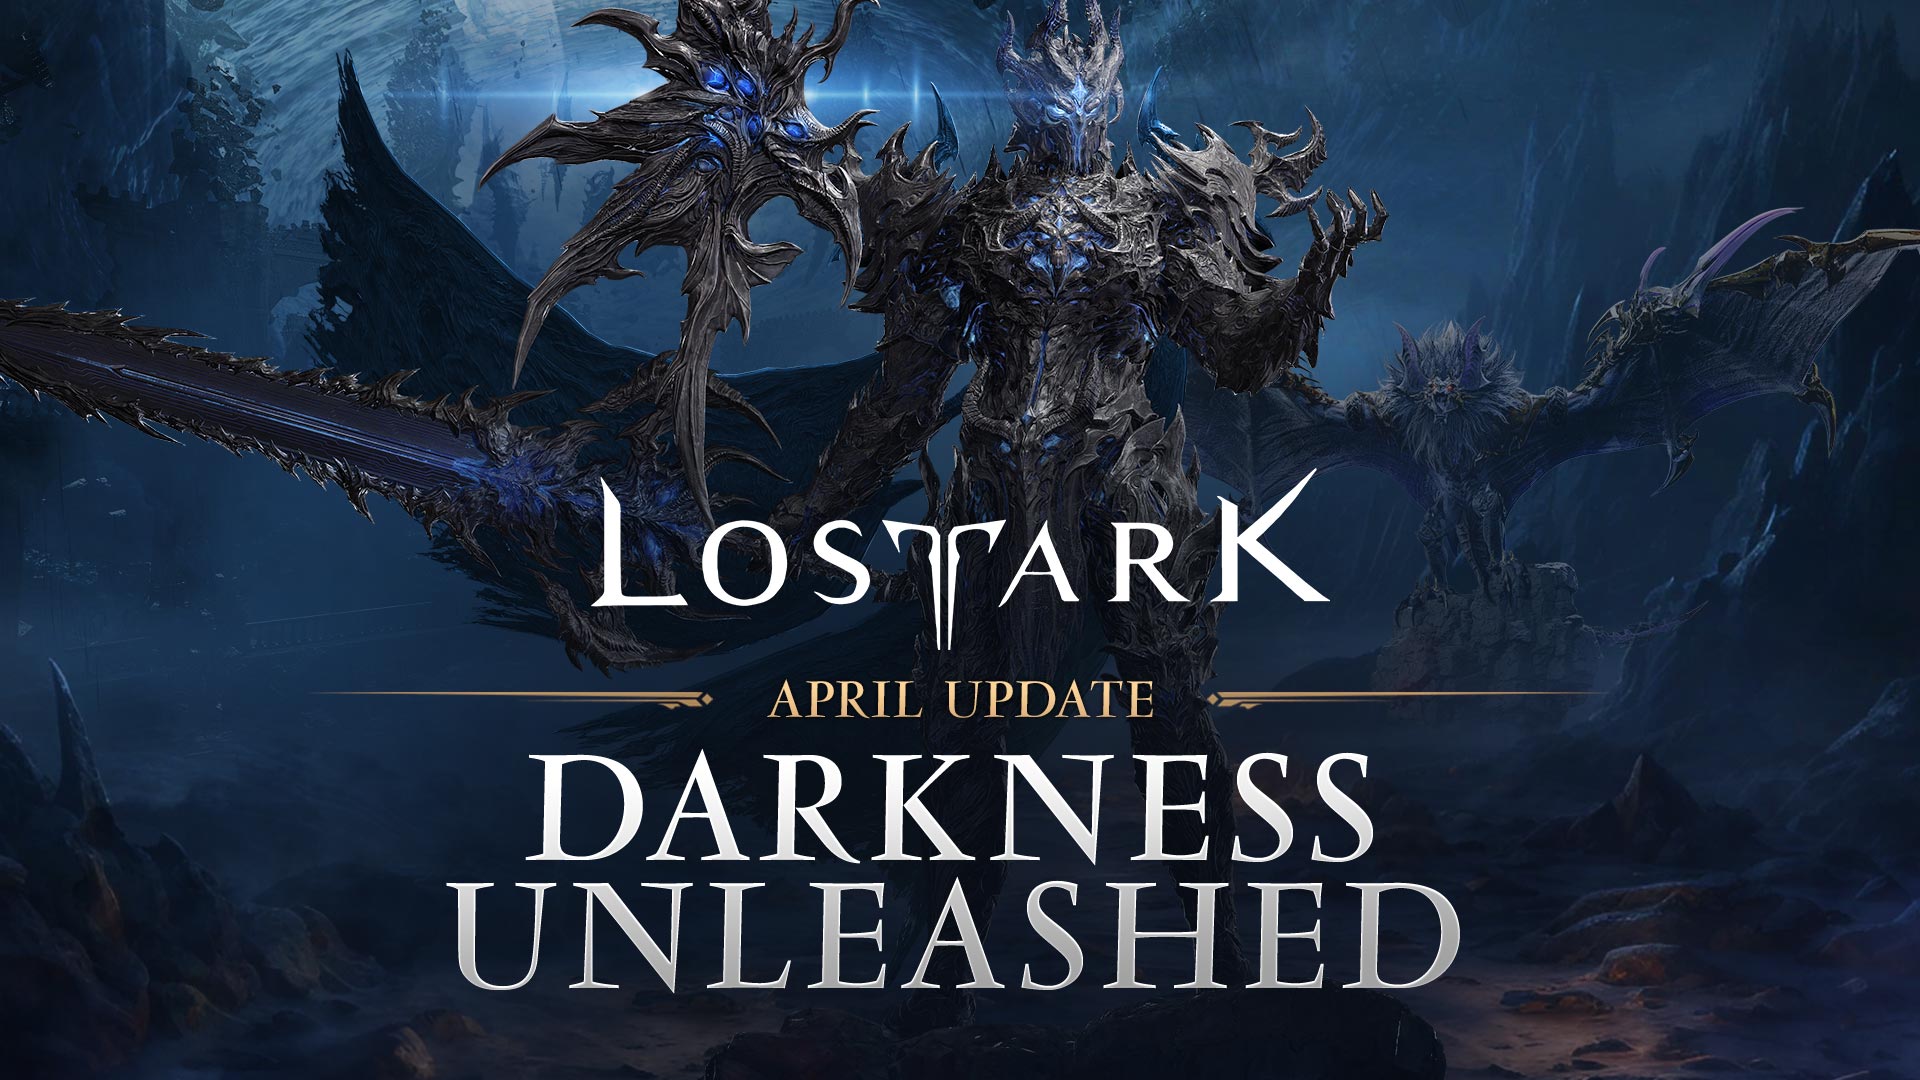 “Darkness Unleashed” Update Arrives in Lost Ark